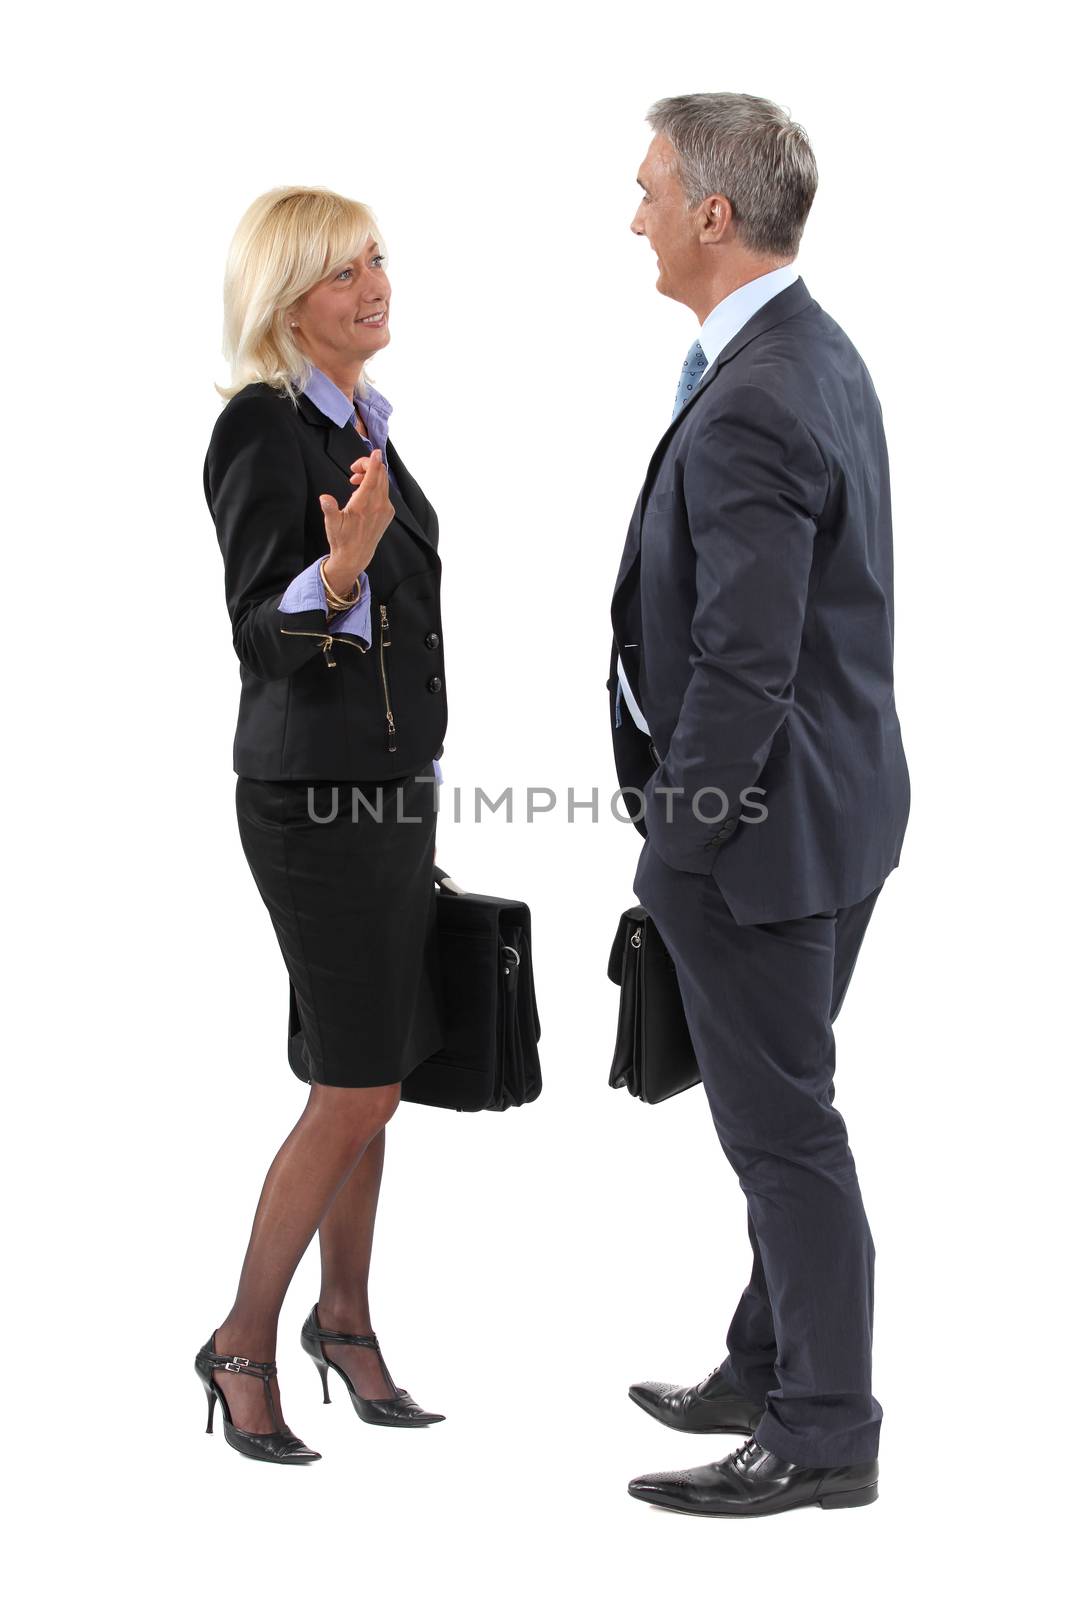 Businesspeople making small talk by phovoir